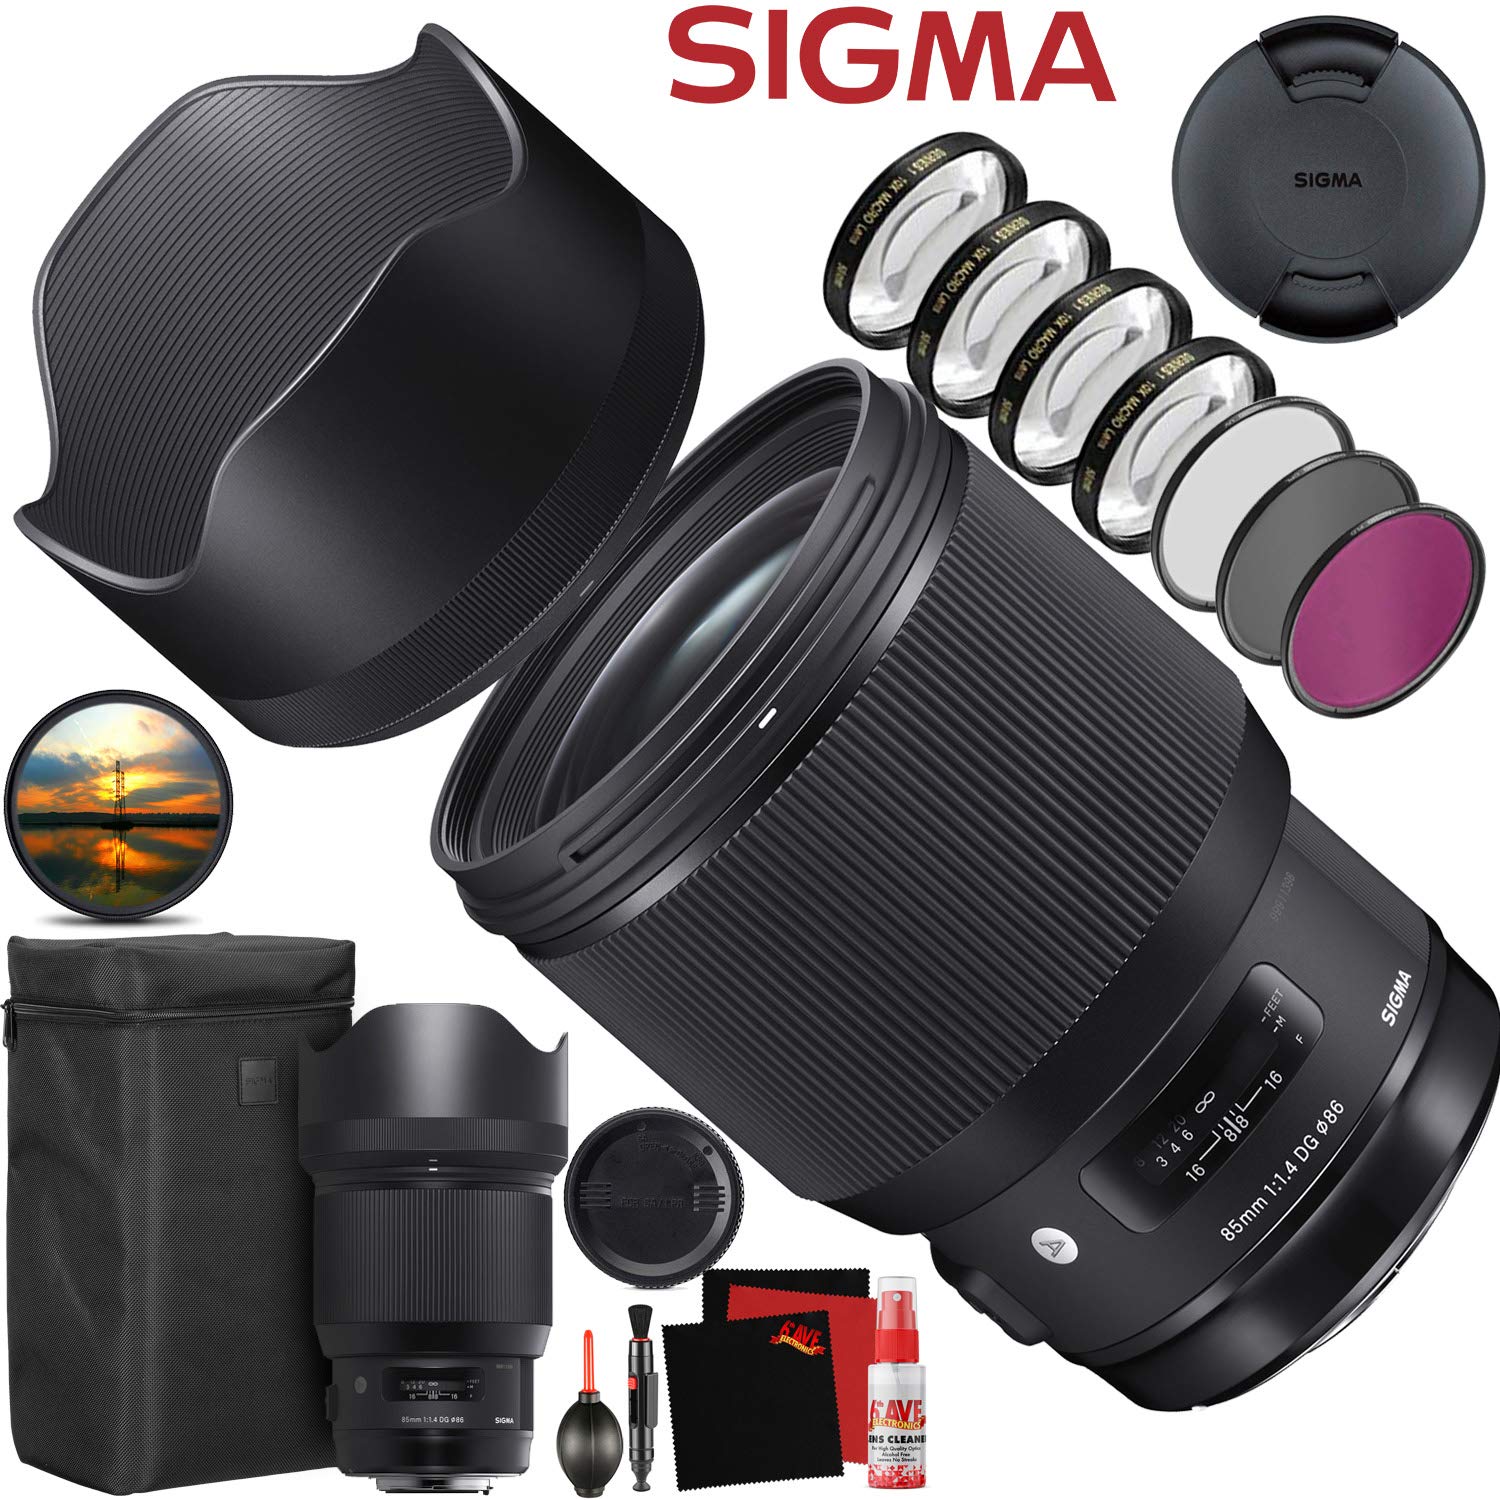 Sigma 85mm f/1.4 DG HSM Art Lens for Canon EF  (321954)  With FLD Filter, CPL Filter, UV Filter - Close Up Filter Kit and Cleaning Accessories Bundle